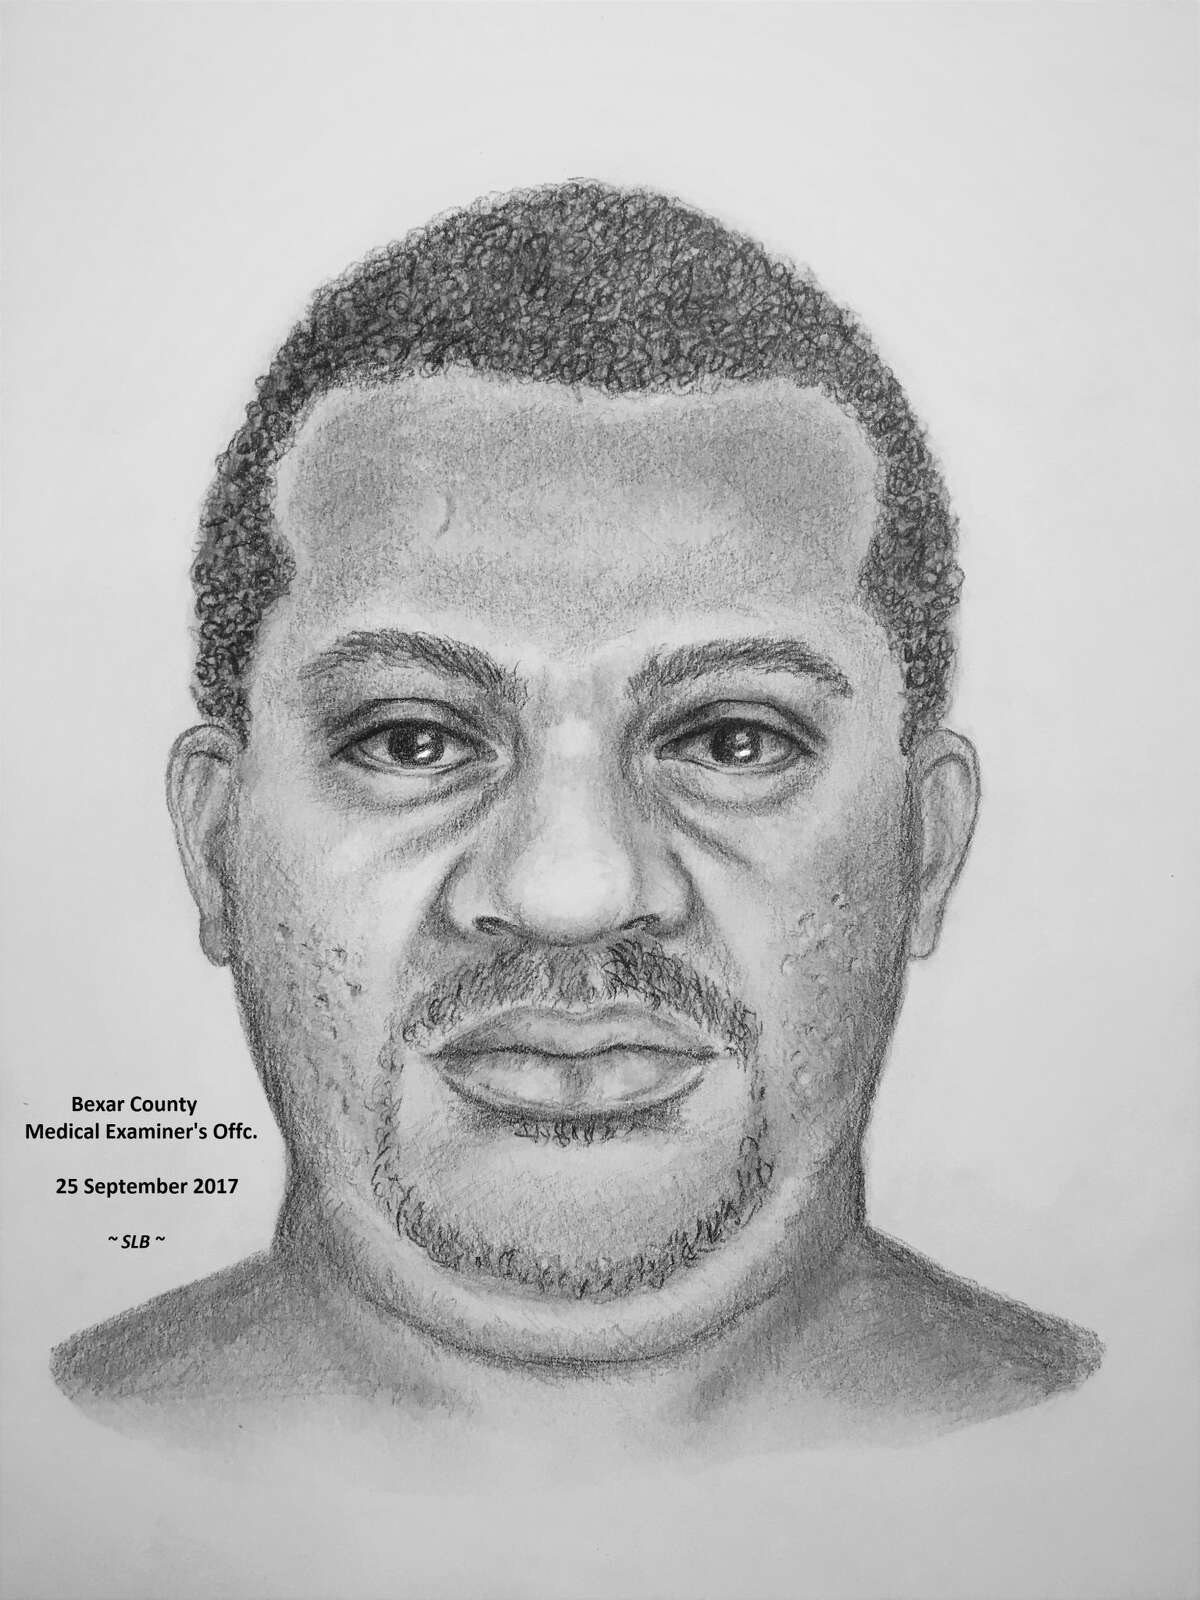 The man was found lying in the middle of the roadway unresponsive. Description: An African American male from 30-50 years of age. He had brown hair and brown eyes and stood about 5-foot-11. Date found: Aug. 24, 2017 Date of death: Around the time of discovery Cause of death: Unknown Contact: San Antonio Police Department at (210) 207-7660